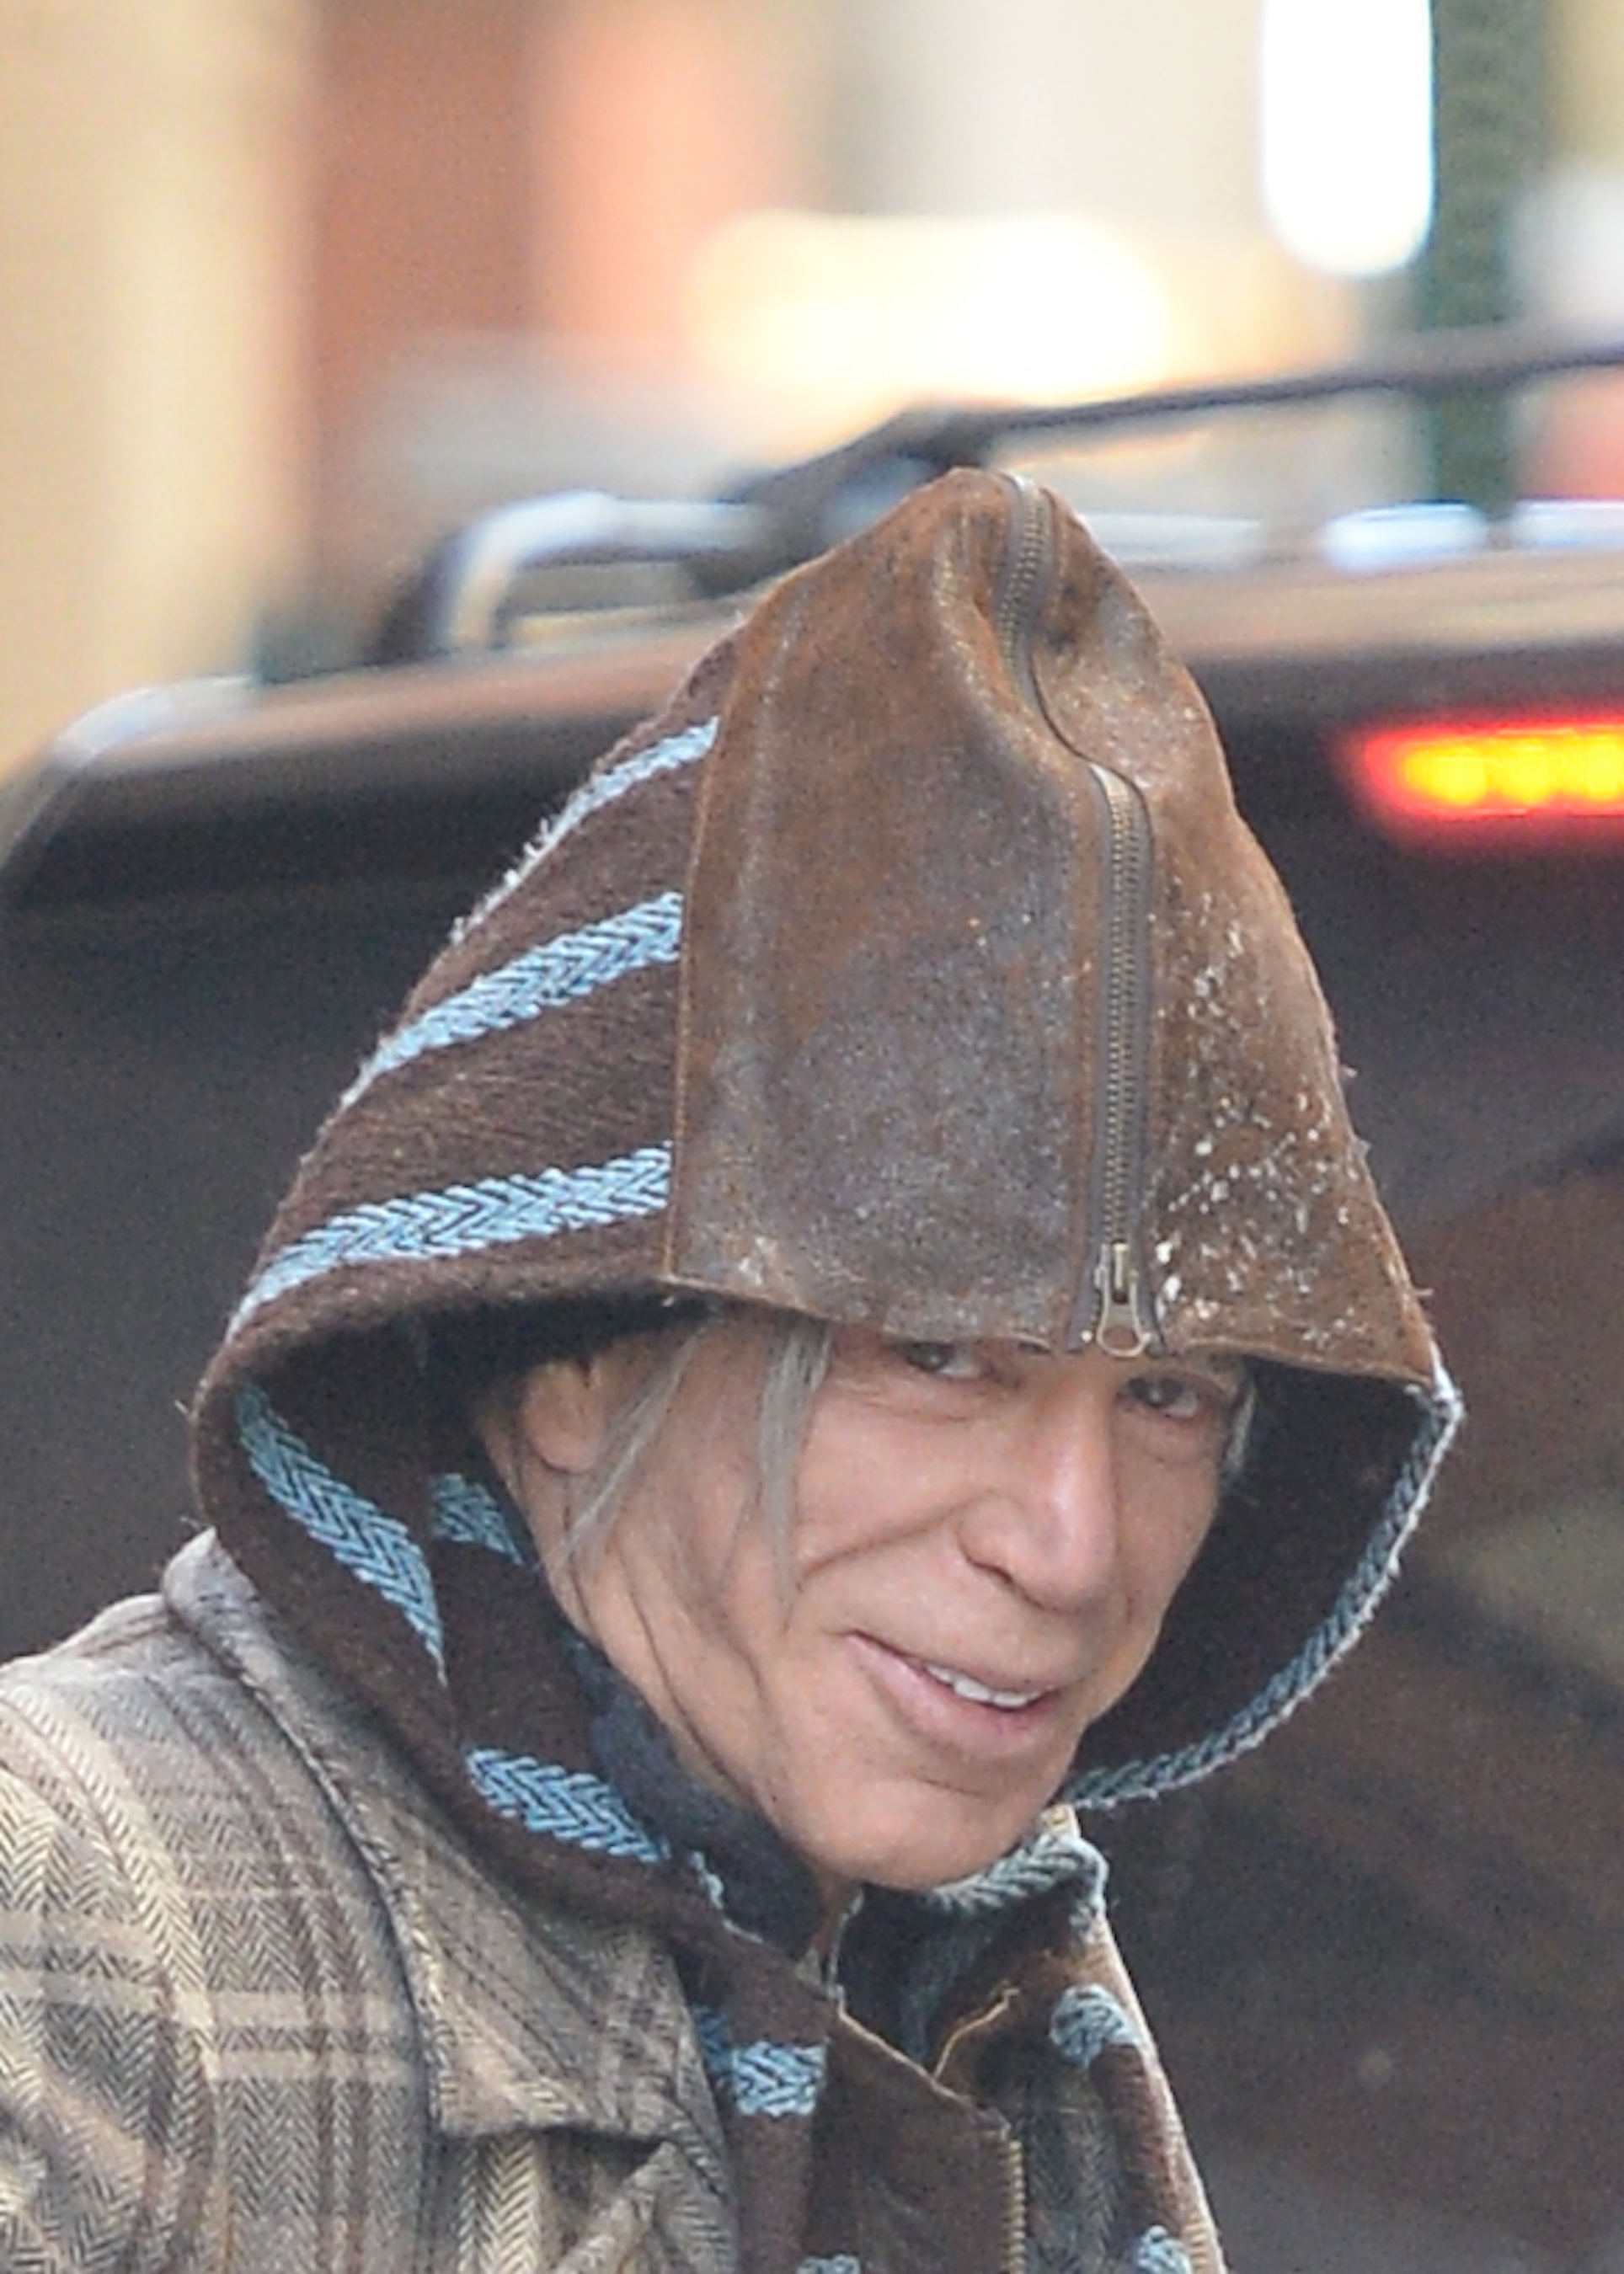 Mickey Rourke seen in Soho on January 13, 2015 in New York City. | Source: Getty Images